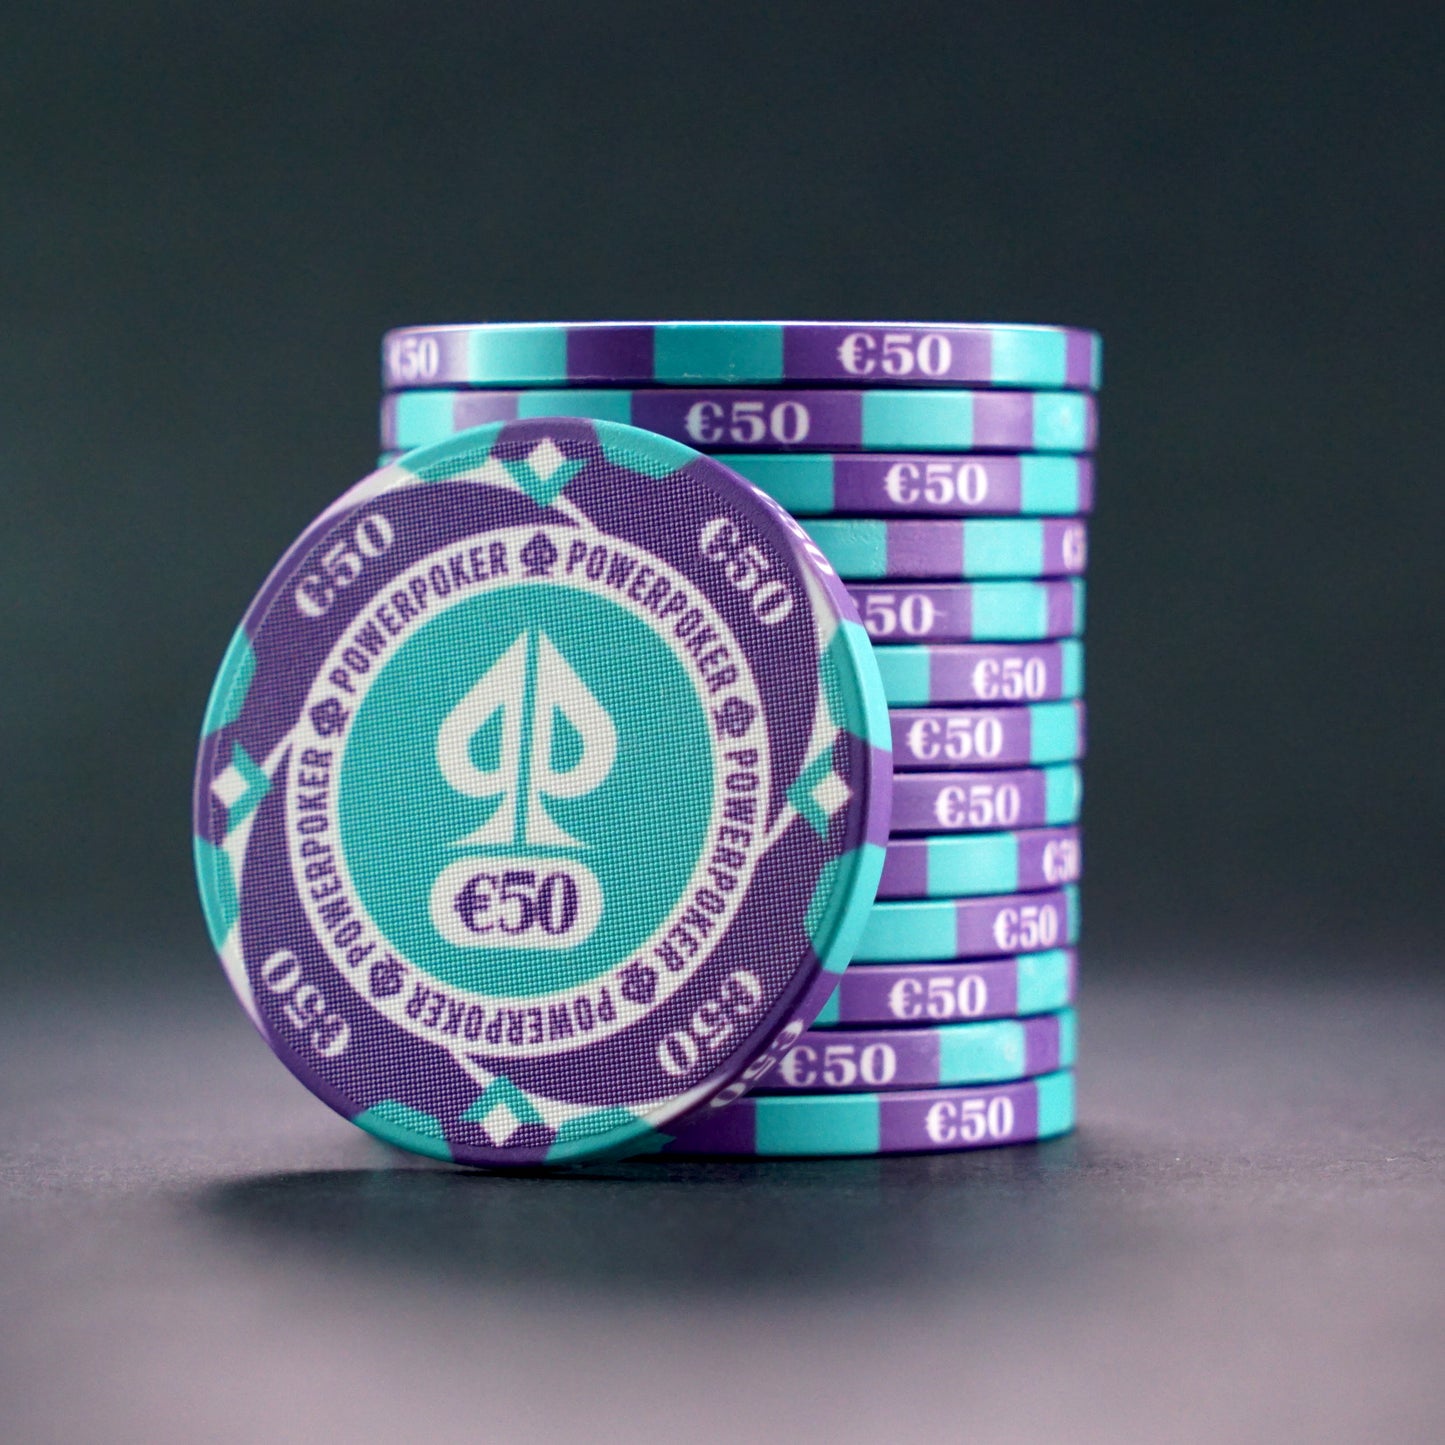 Hurricane Edition 5000 - Ceramic Poker Chips (25 pieces)